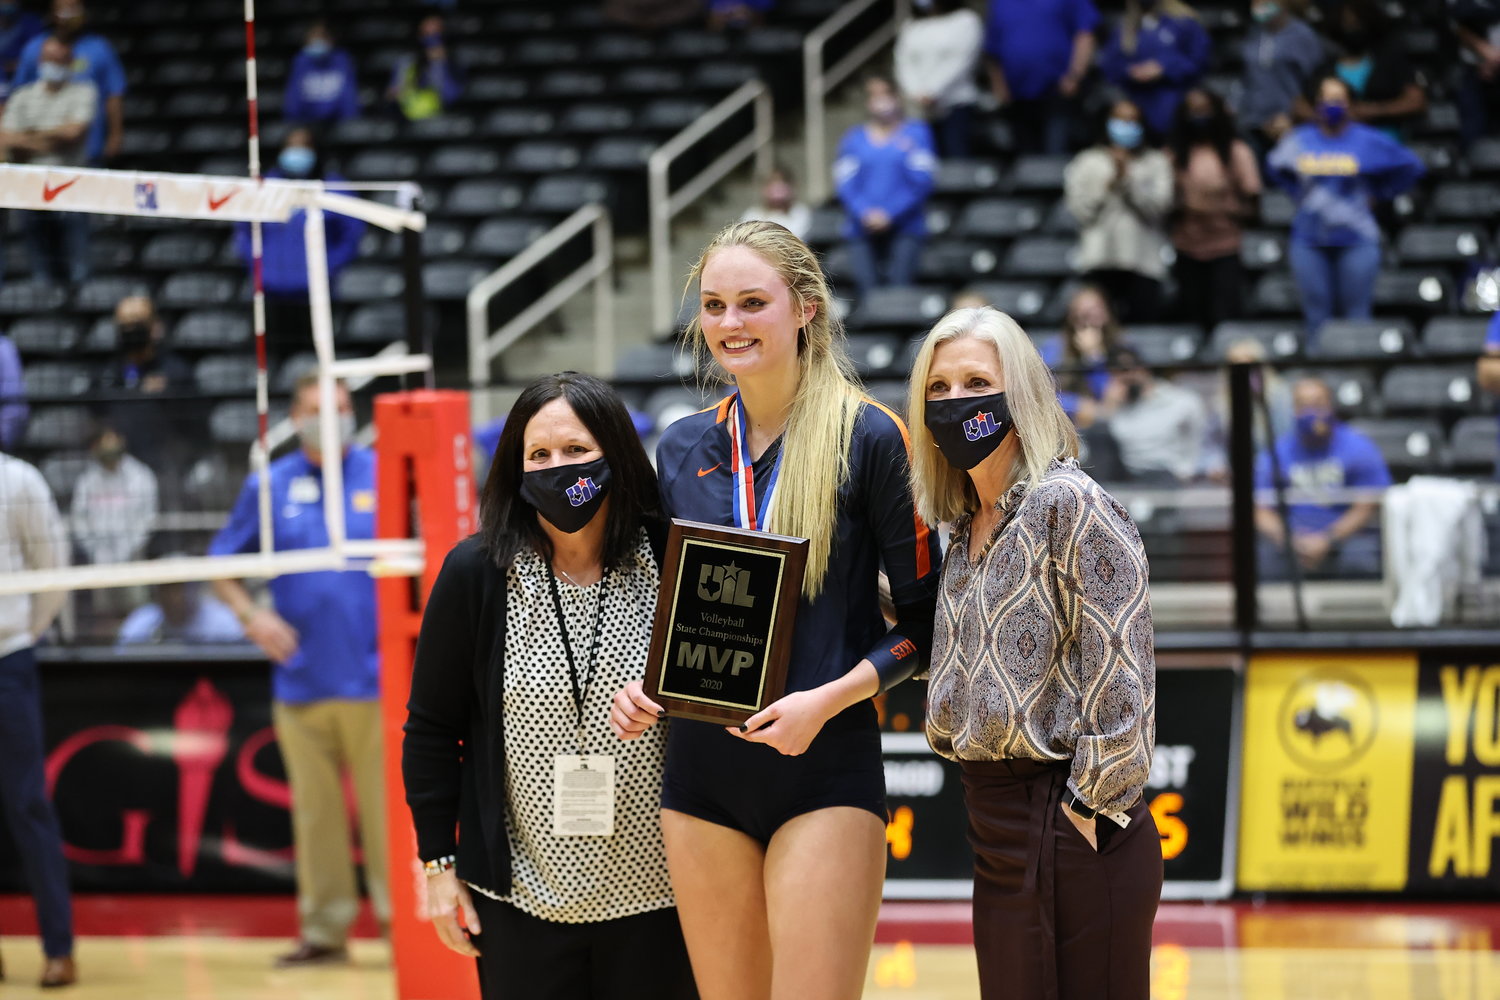 Seven Lakes senior outside hitter Ally Batenhorst was named Class 6A state championship Most Valuable Player after posting 30 kills, 15 digs and two blocks in the Spartans' win.